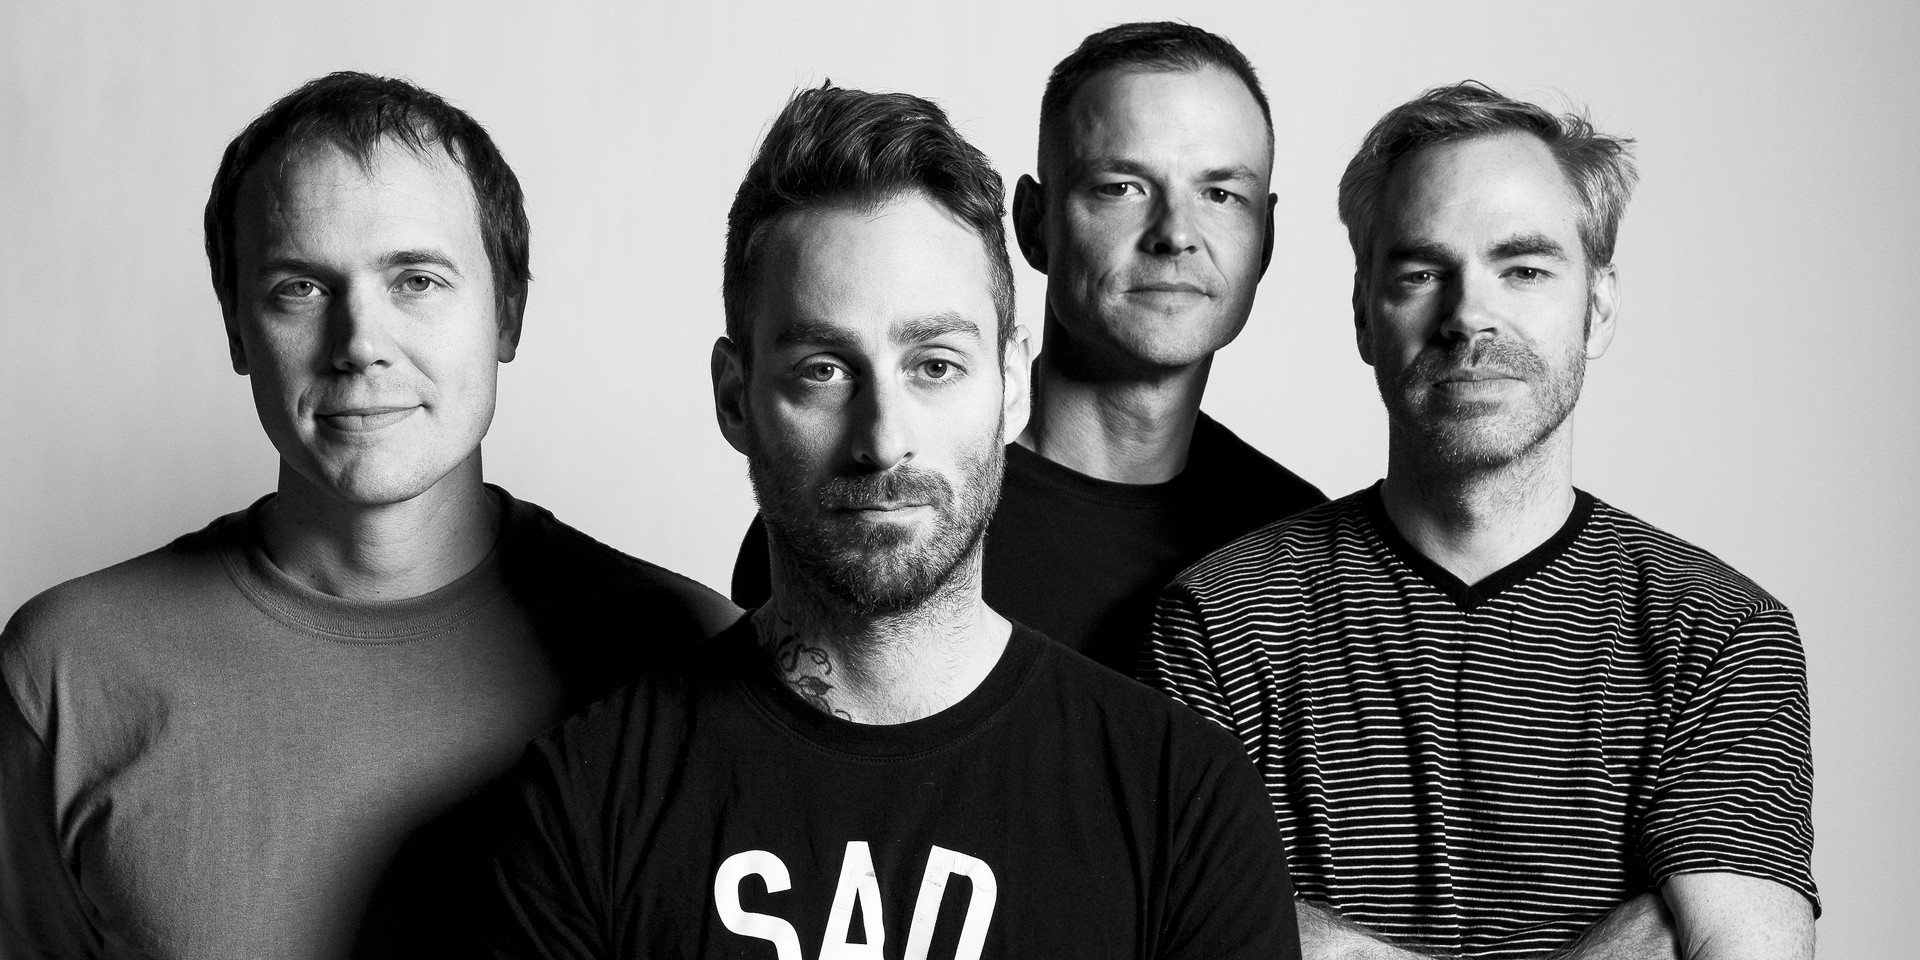 American Football's Mike Kinsella, on fatherhood and music: "My time isn't my own anymore"